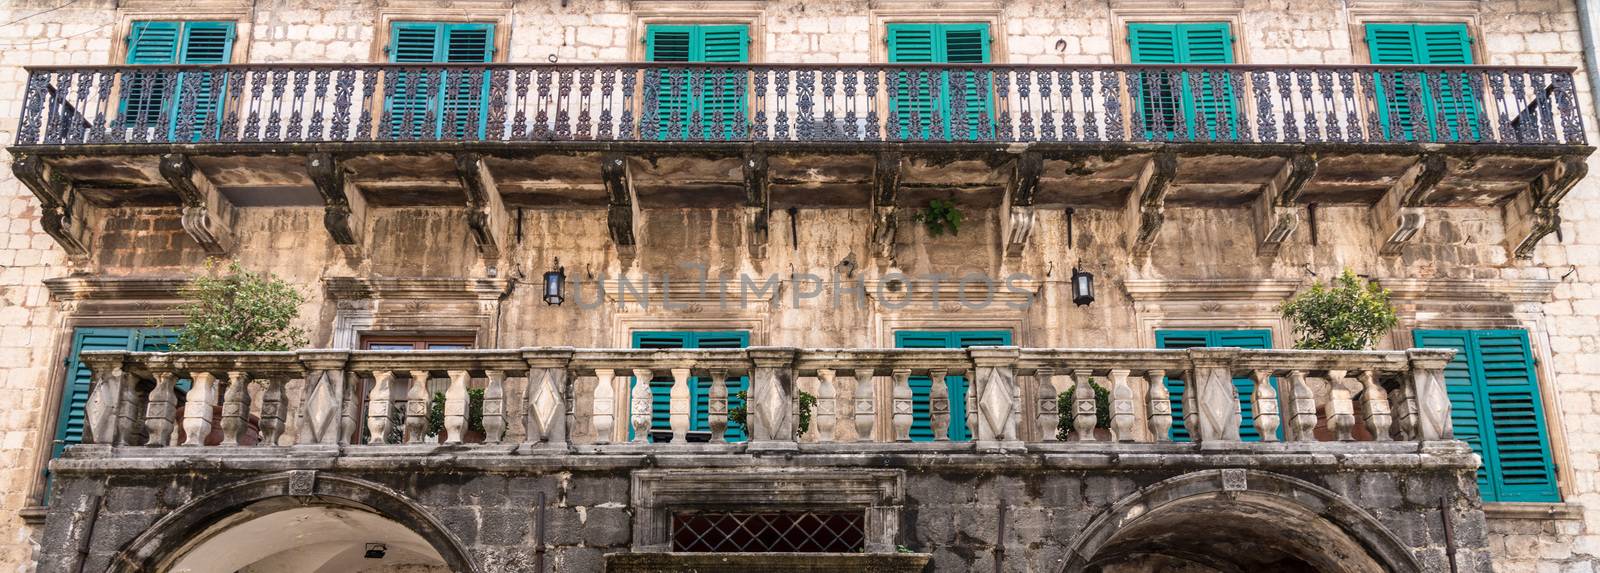 Green shutters on home in the Old Town of Kotor in Montenegro by steheap